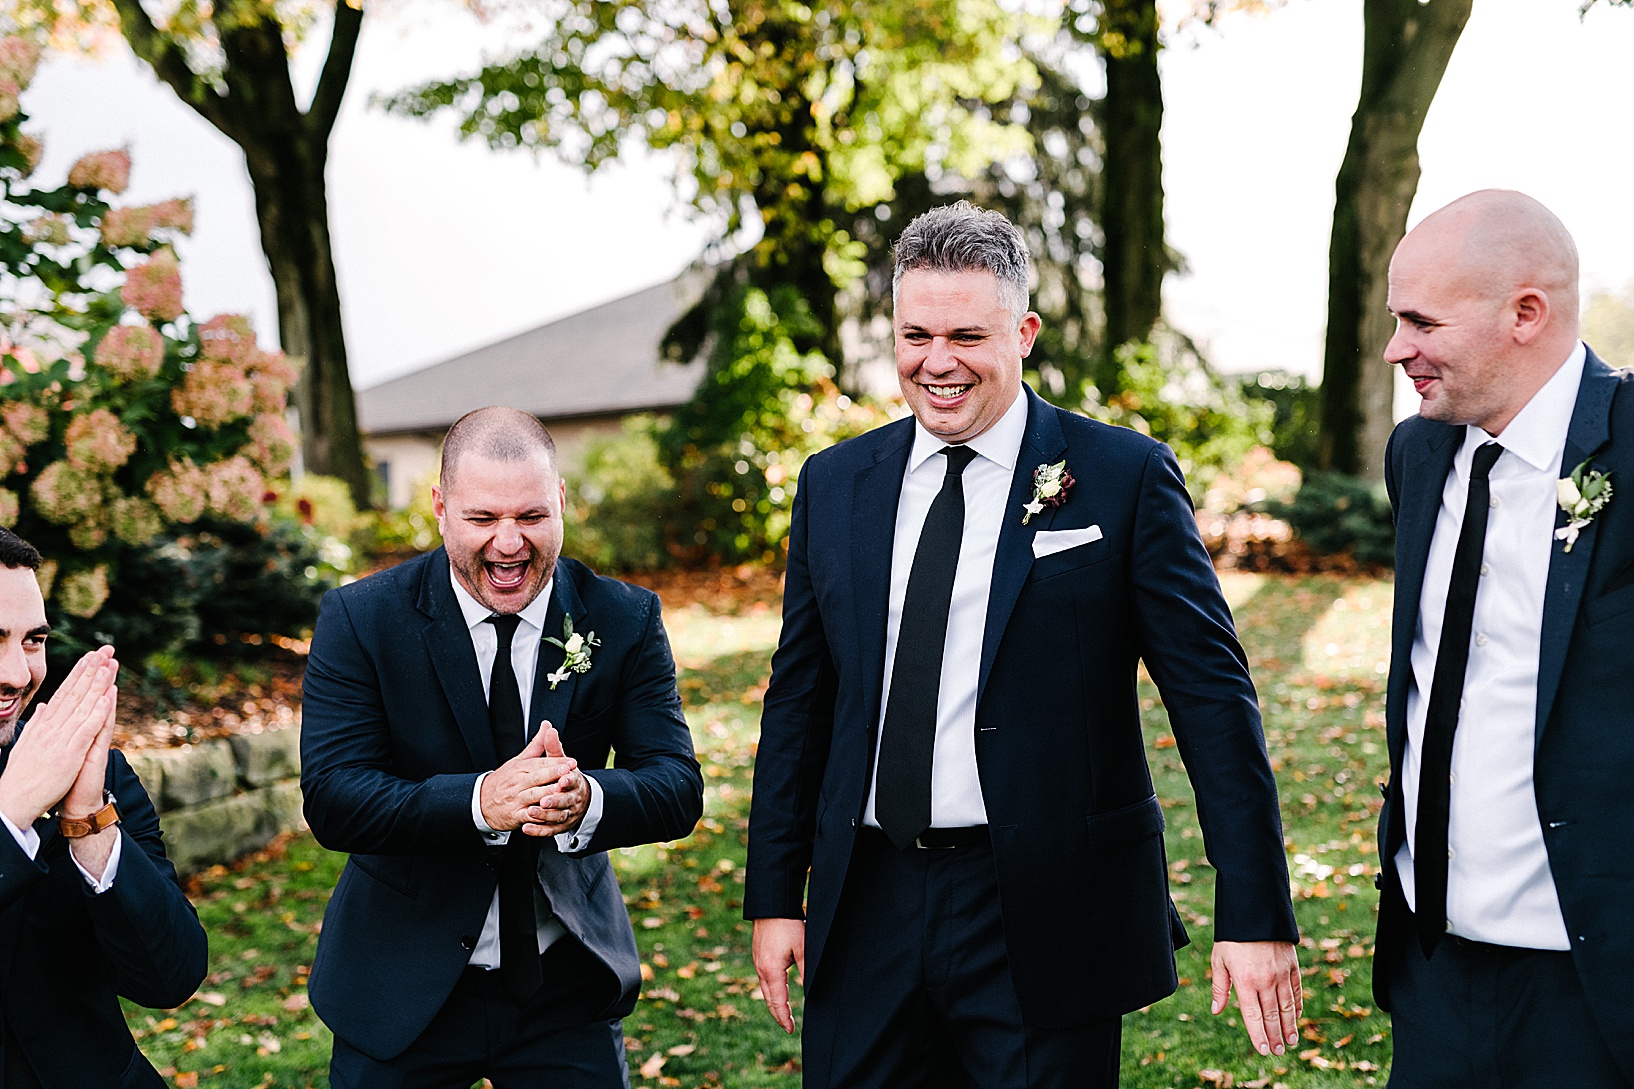 A groomsman claps his hands laughing while the groom smiles and laughs while standing on the lawn of the Lake Club.